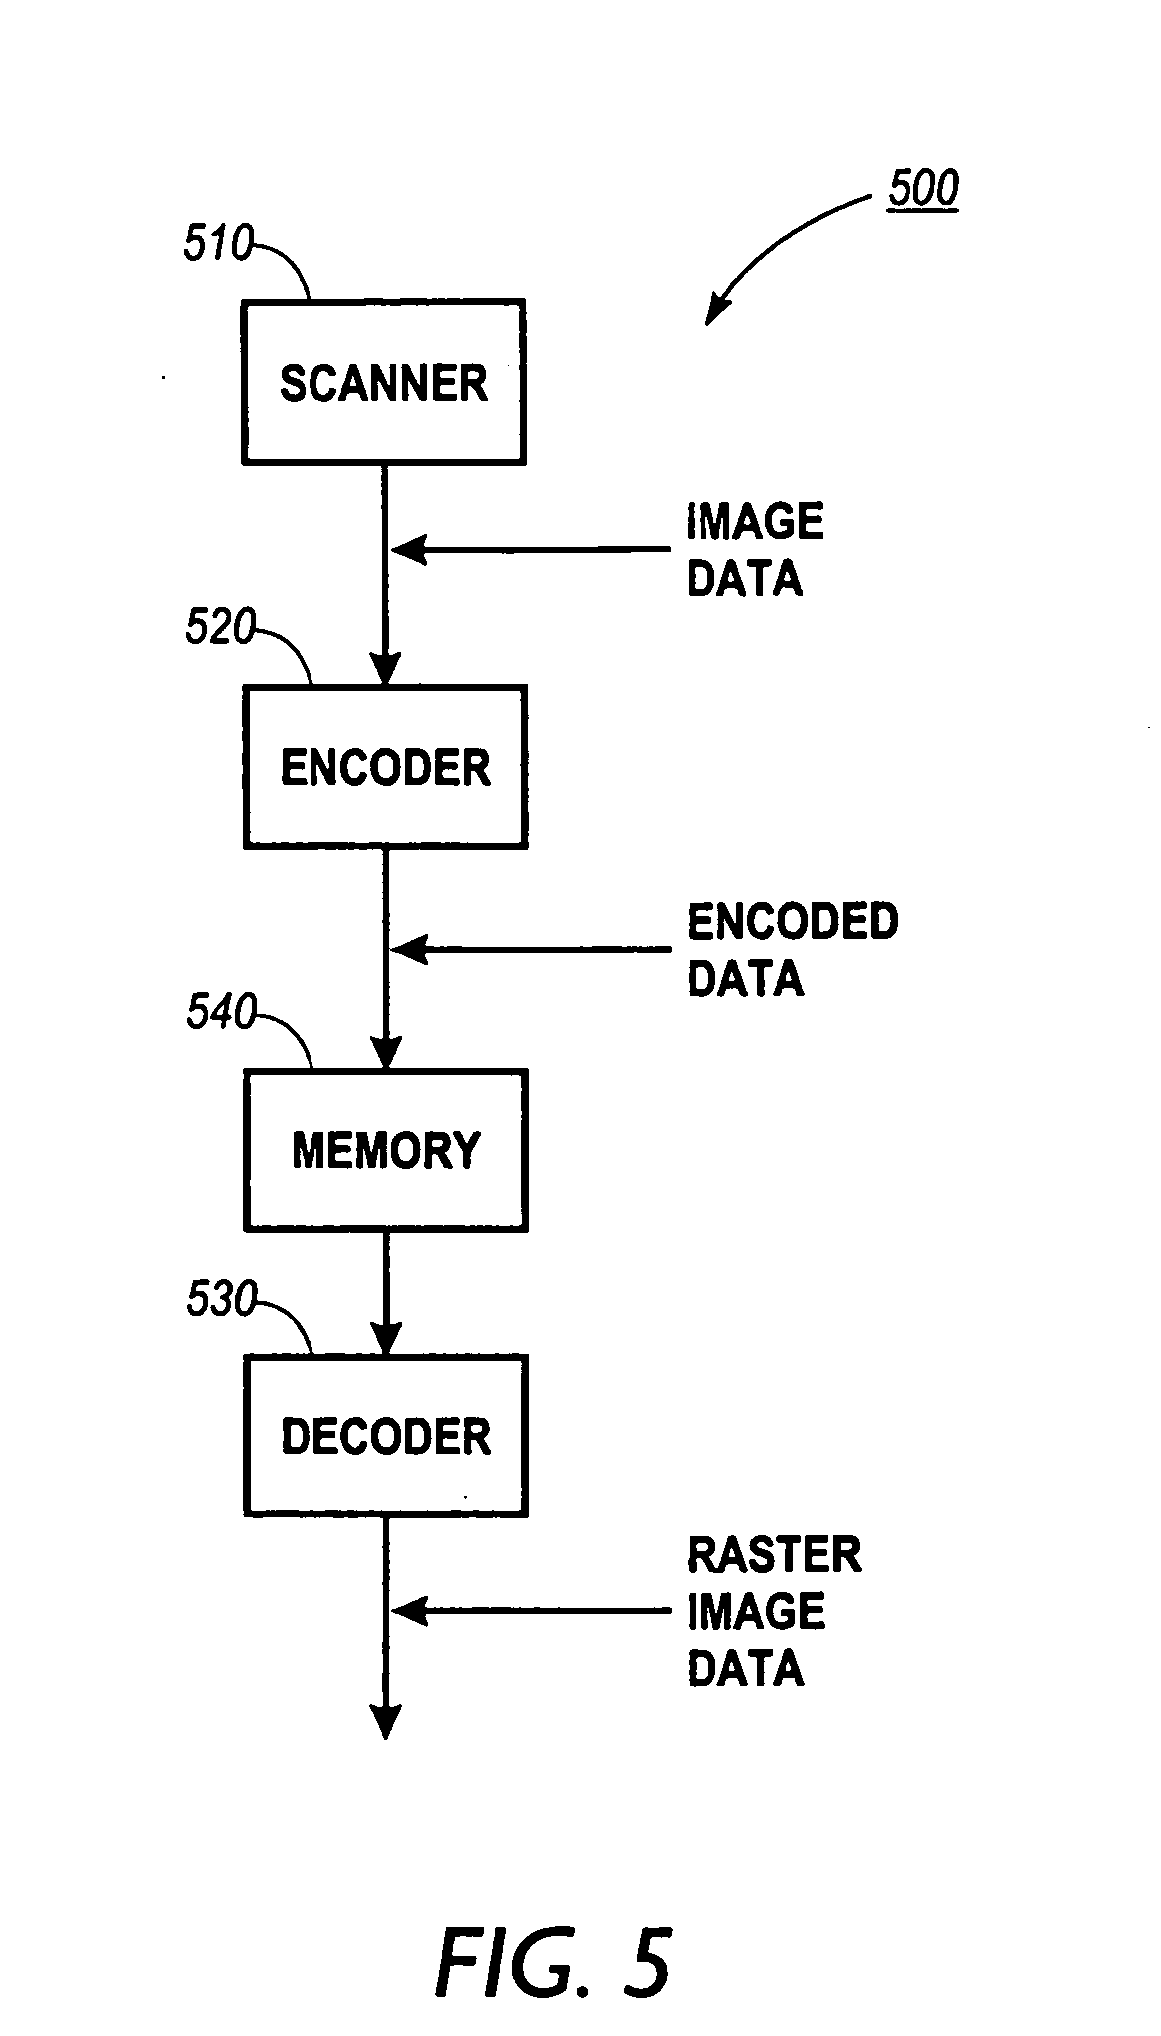 Methods for generating anti-aliased text and line graphics in compressed document images